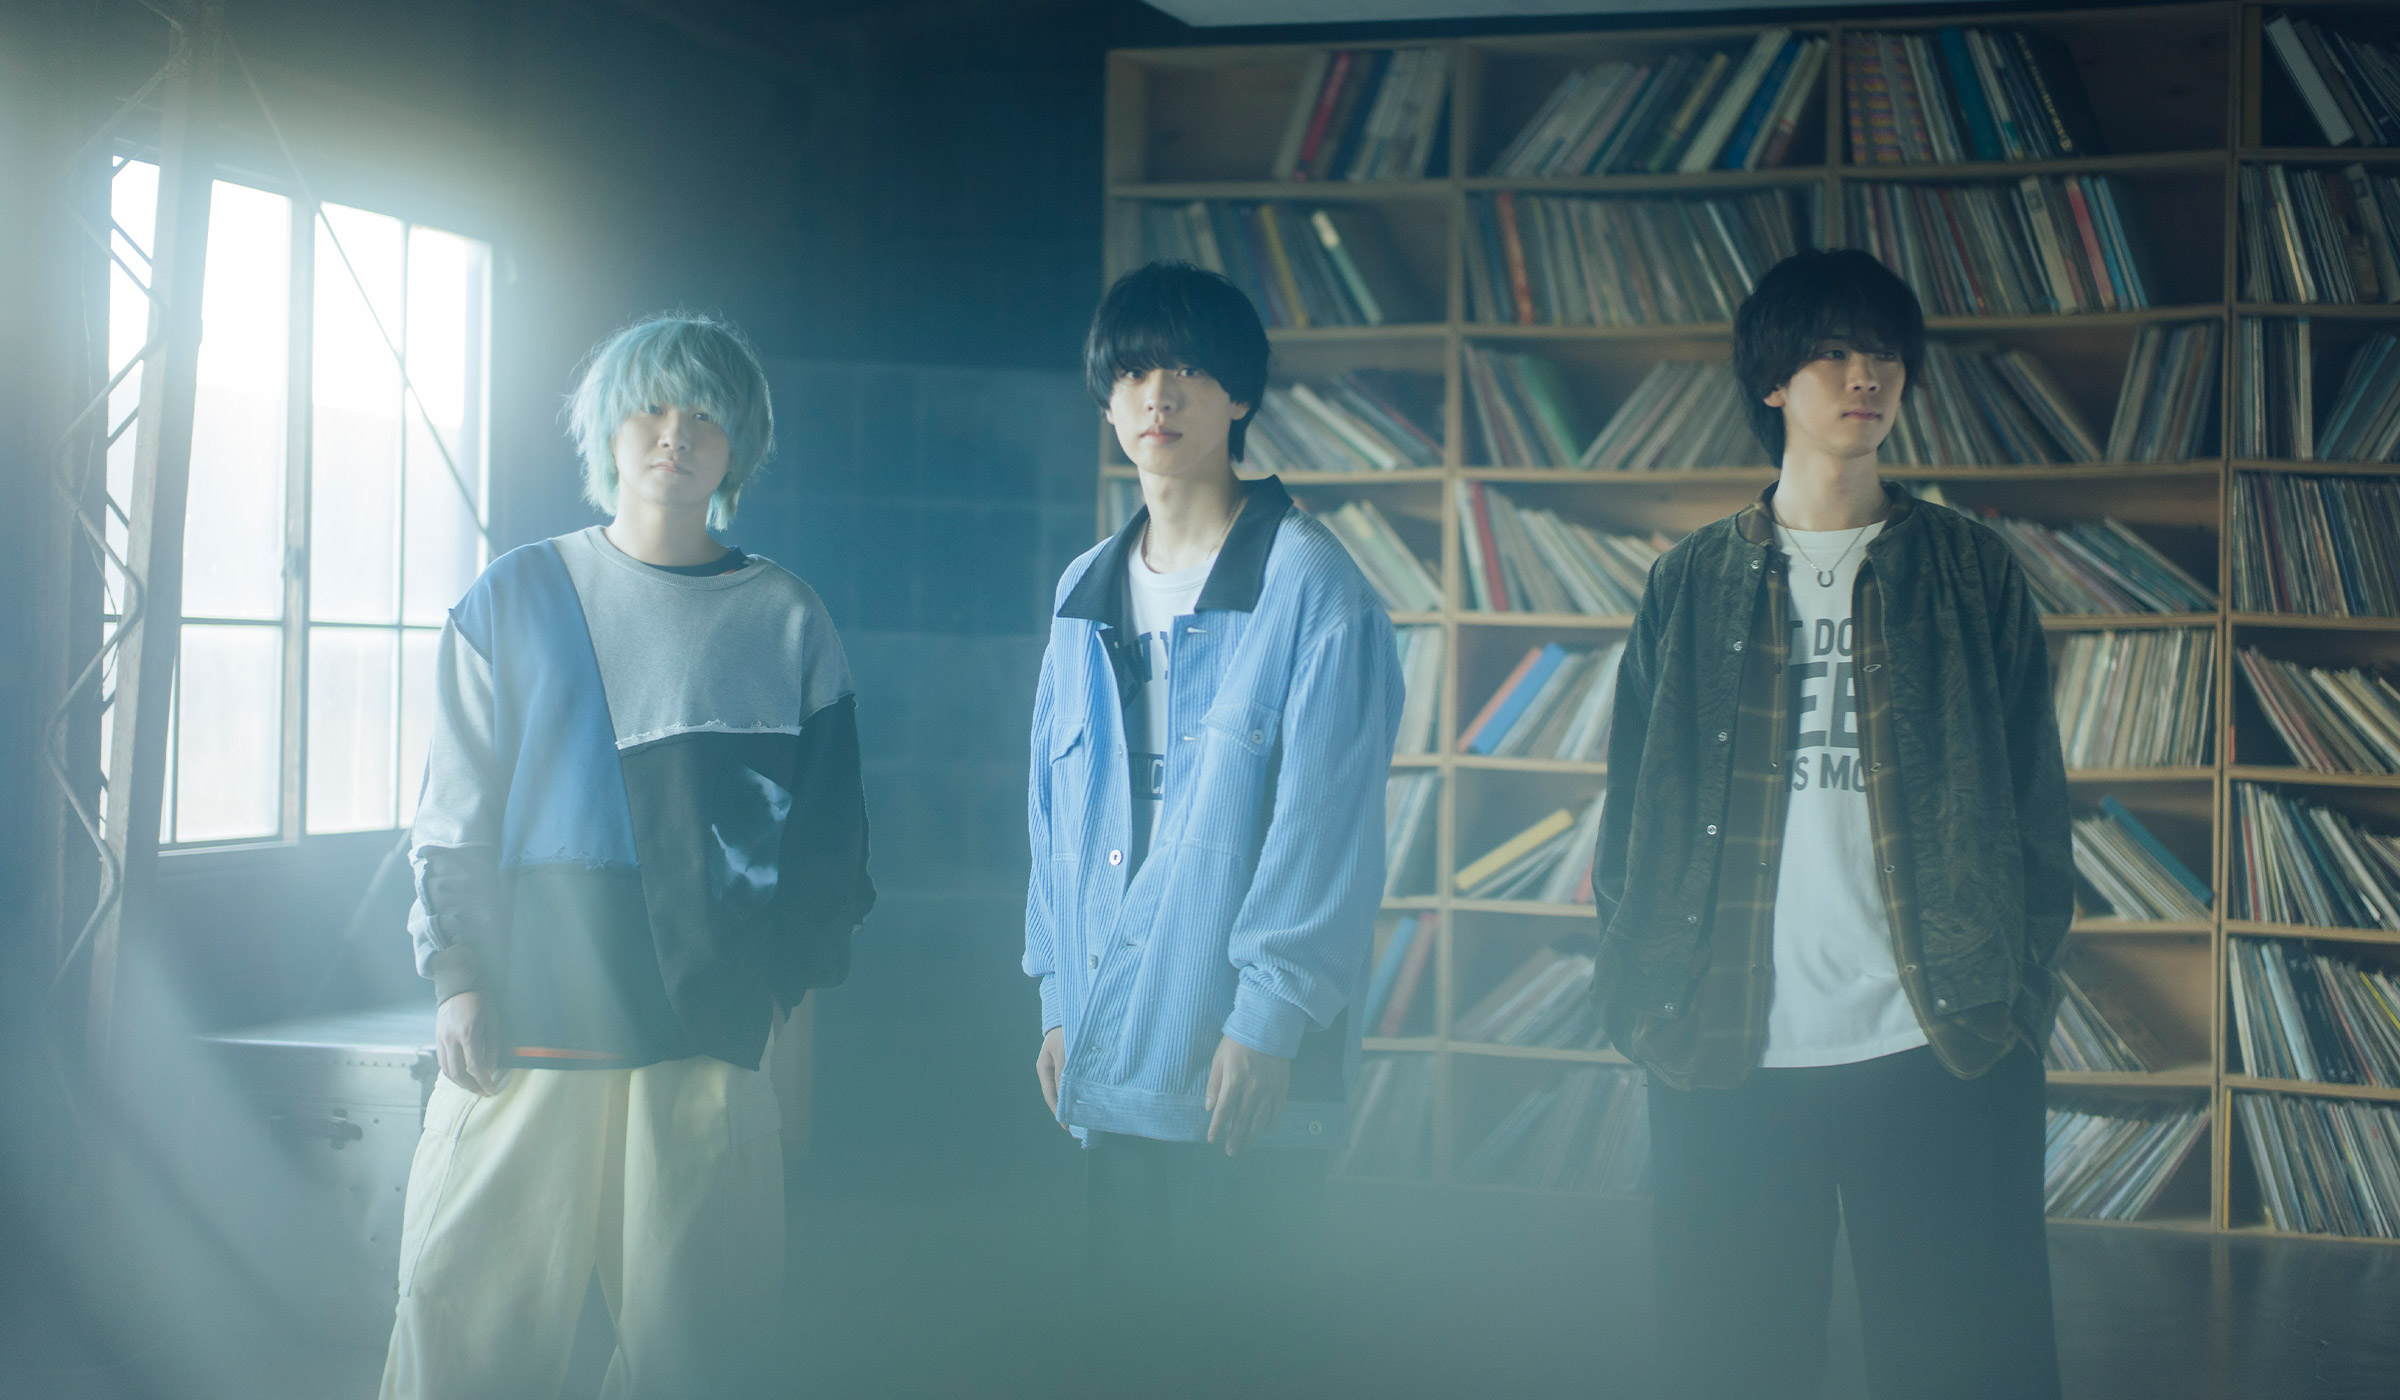 2nd ALBUM「Candle」リリース決定！｜ マルシィ｜Official Site 